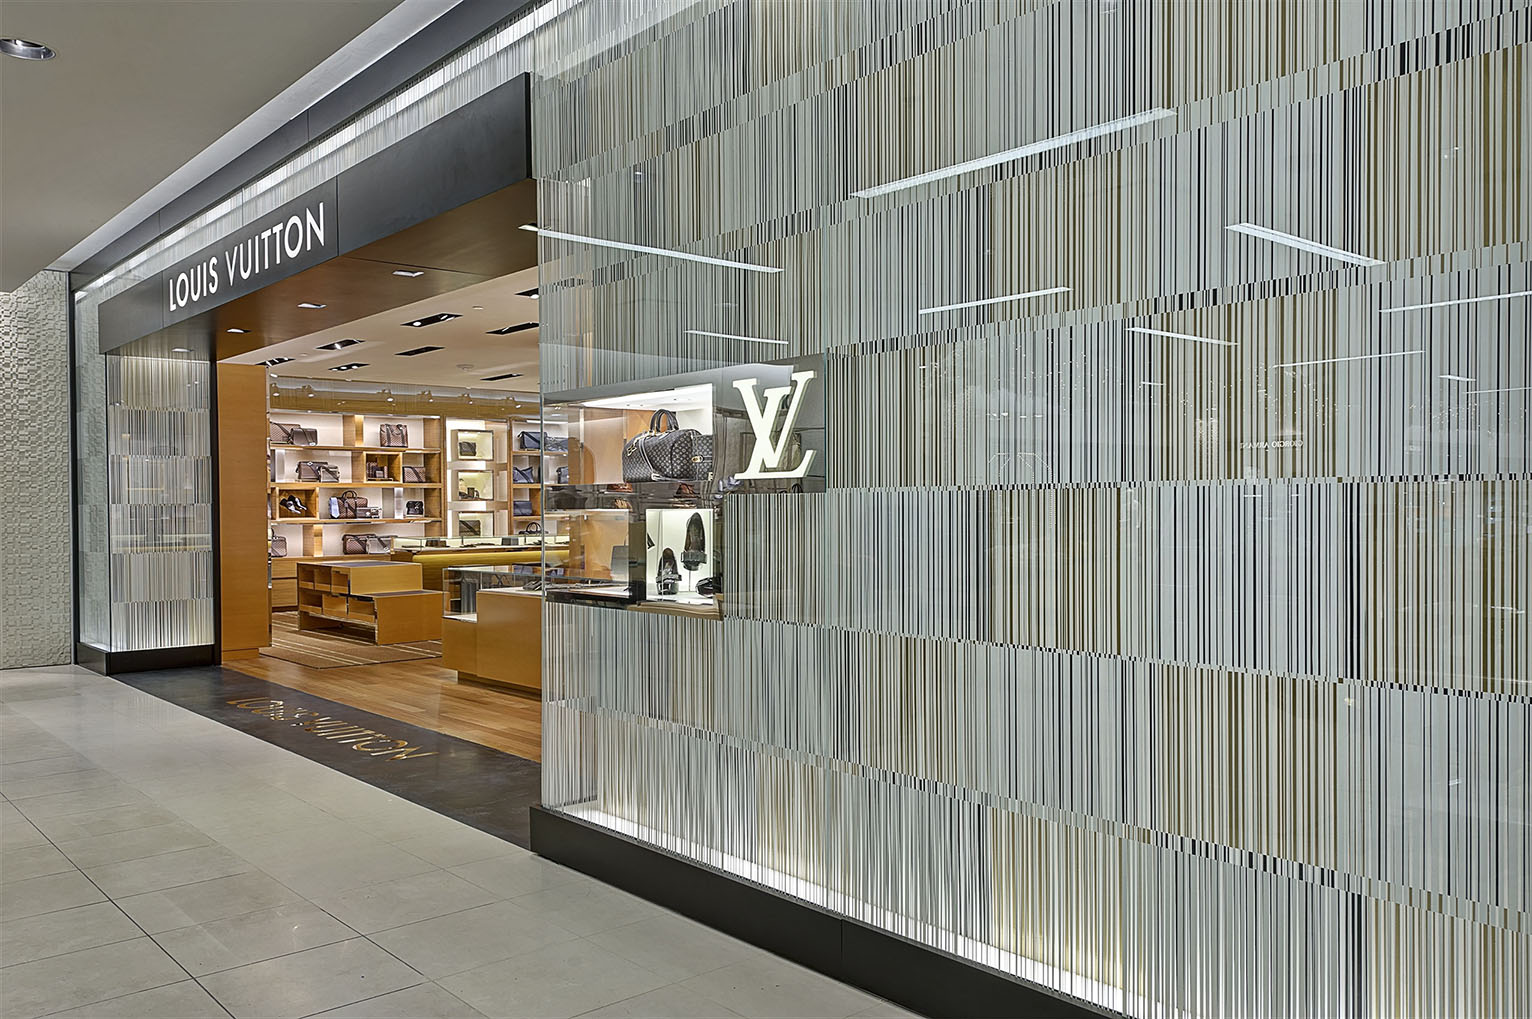 Louis Vuitton store on the corner of Rodeo Drive and Dayton Way in